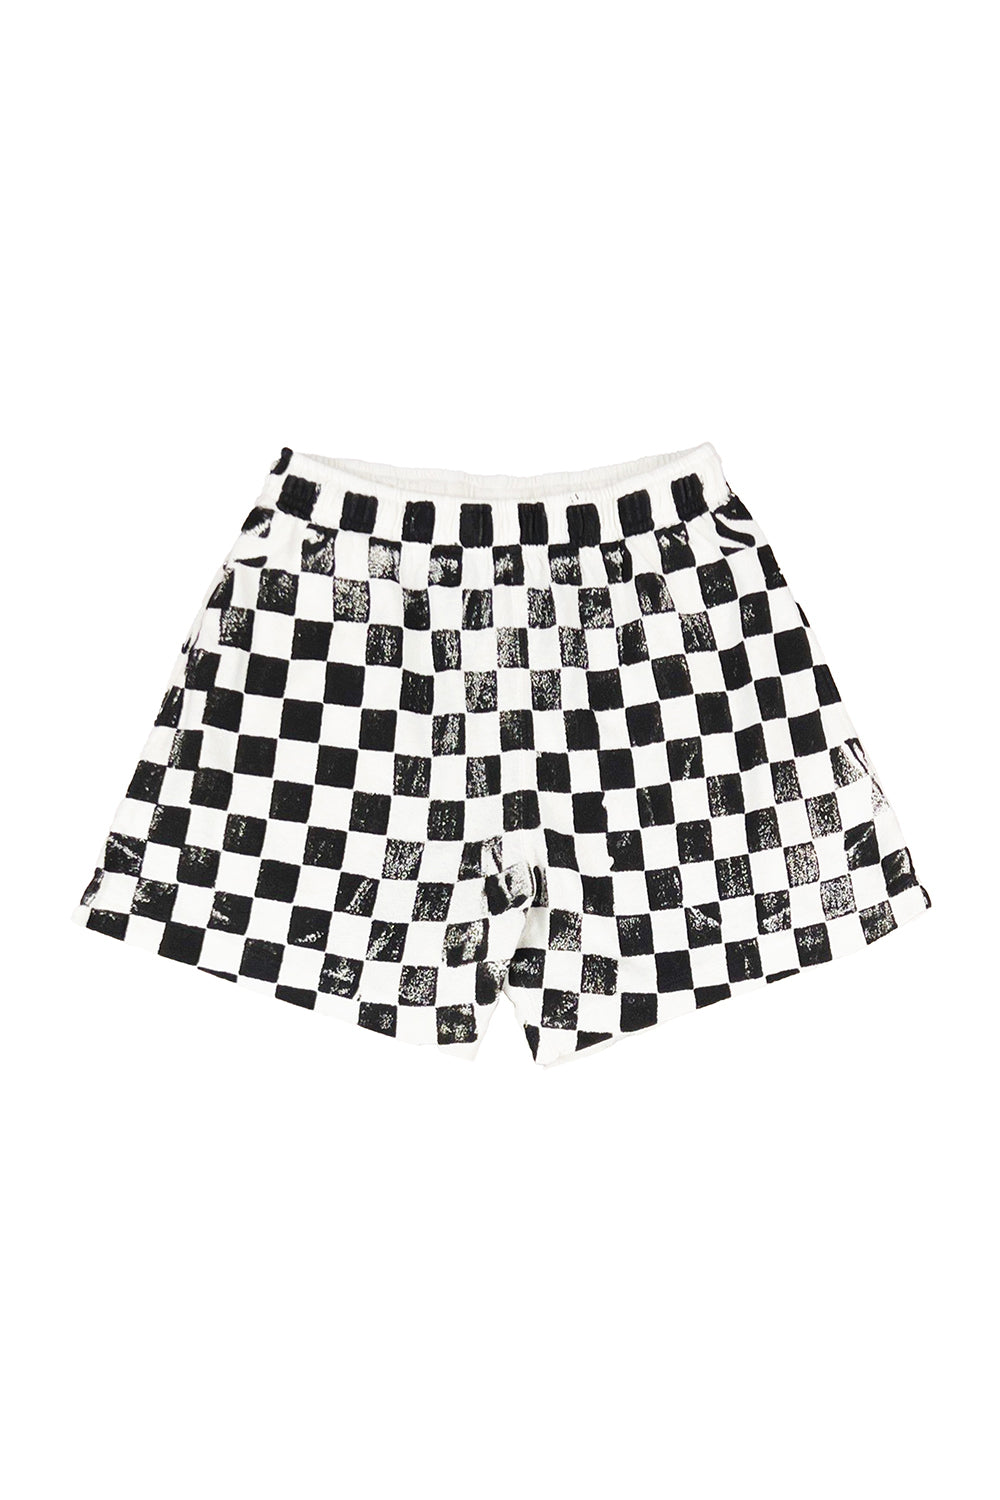 Checkerboard Sun Short | Jungmaven Hemp Clothing & Accessories / Color: Black Checker on Washed White